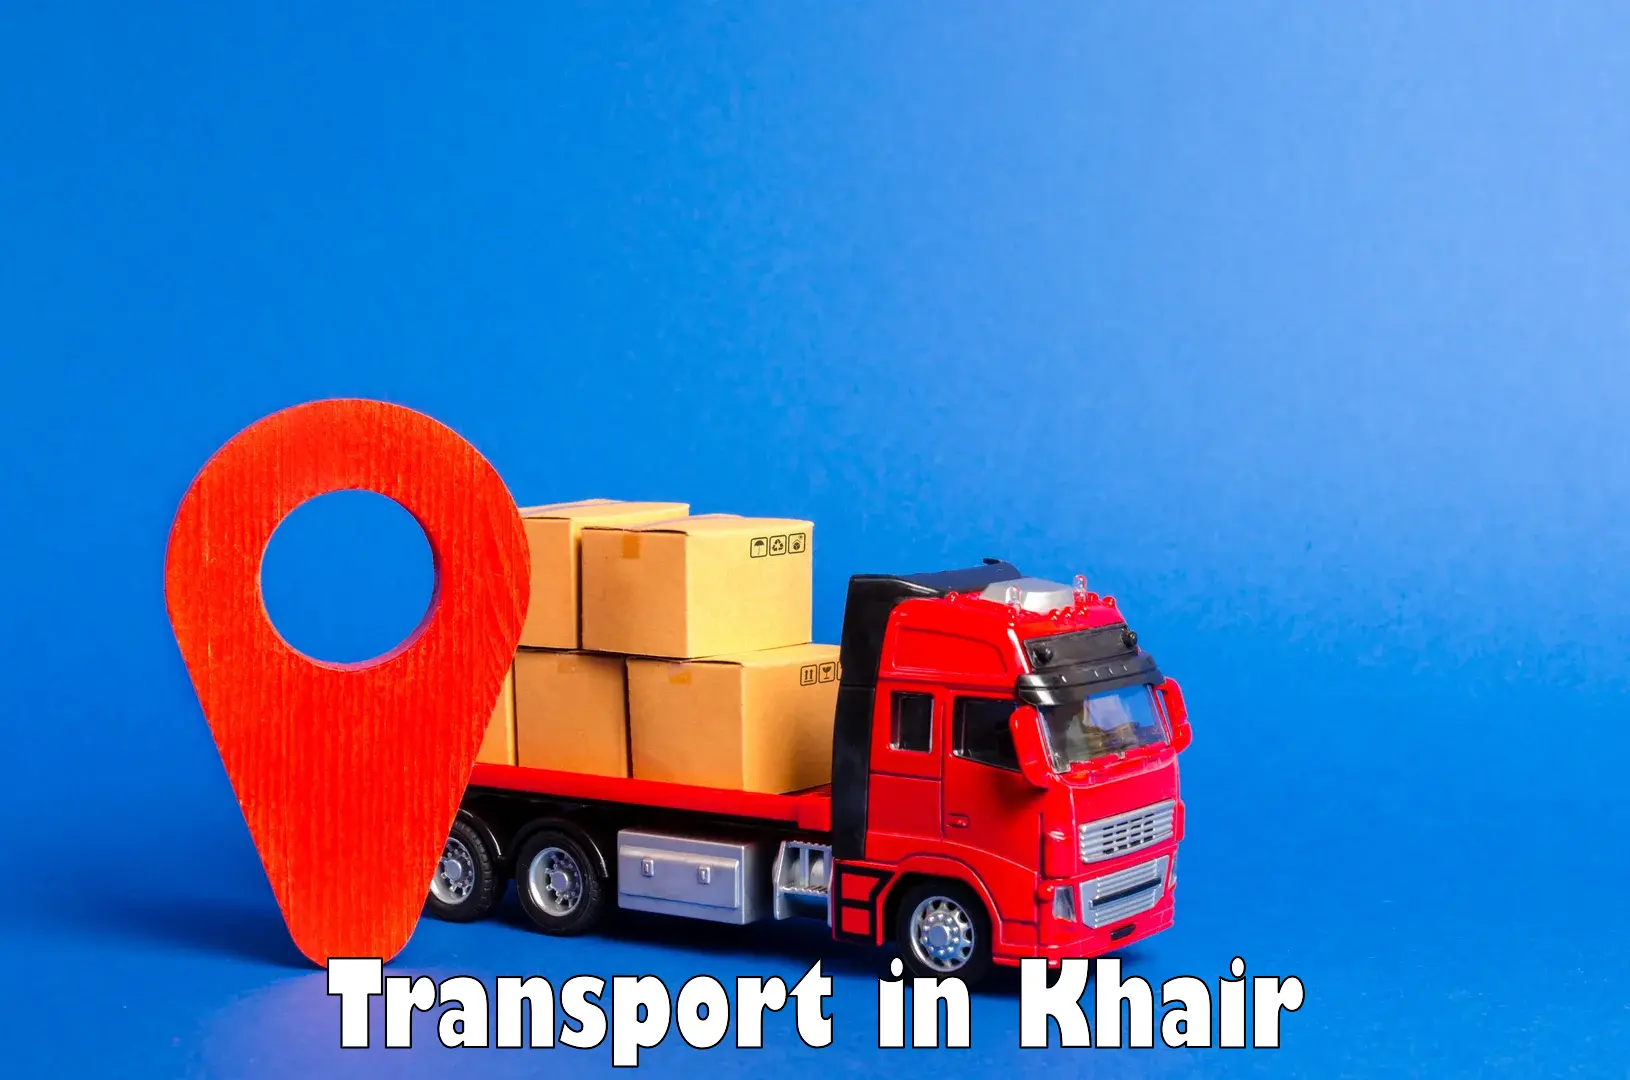 Goods delivery service in Khair